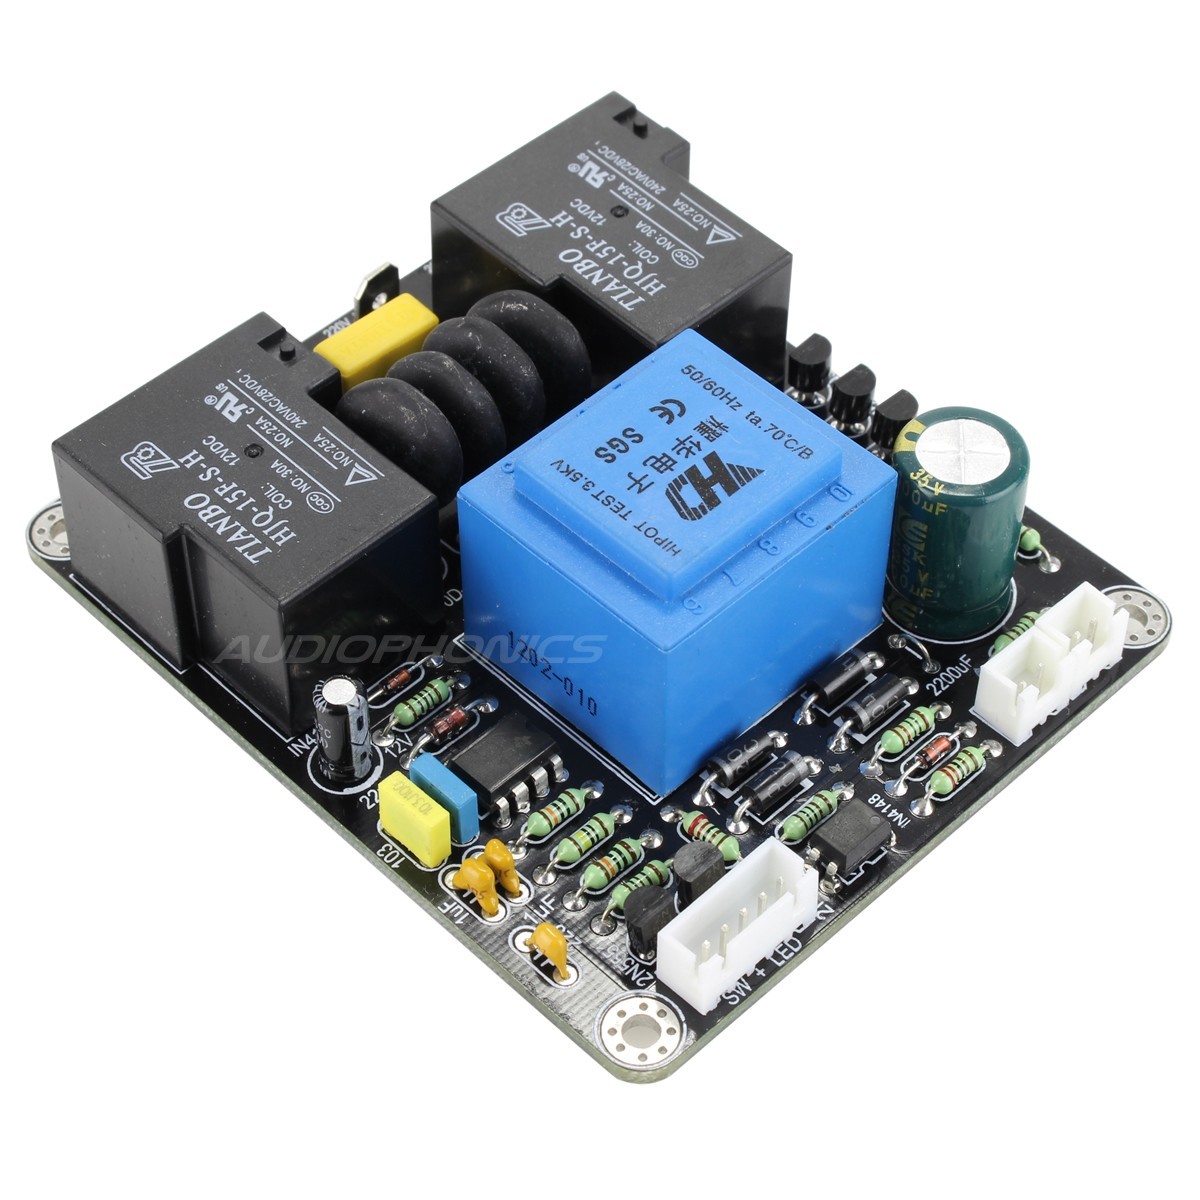 Power on and delay softstart board and protection for amplifier